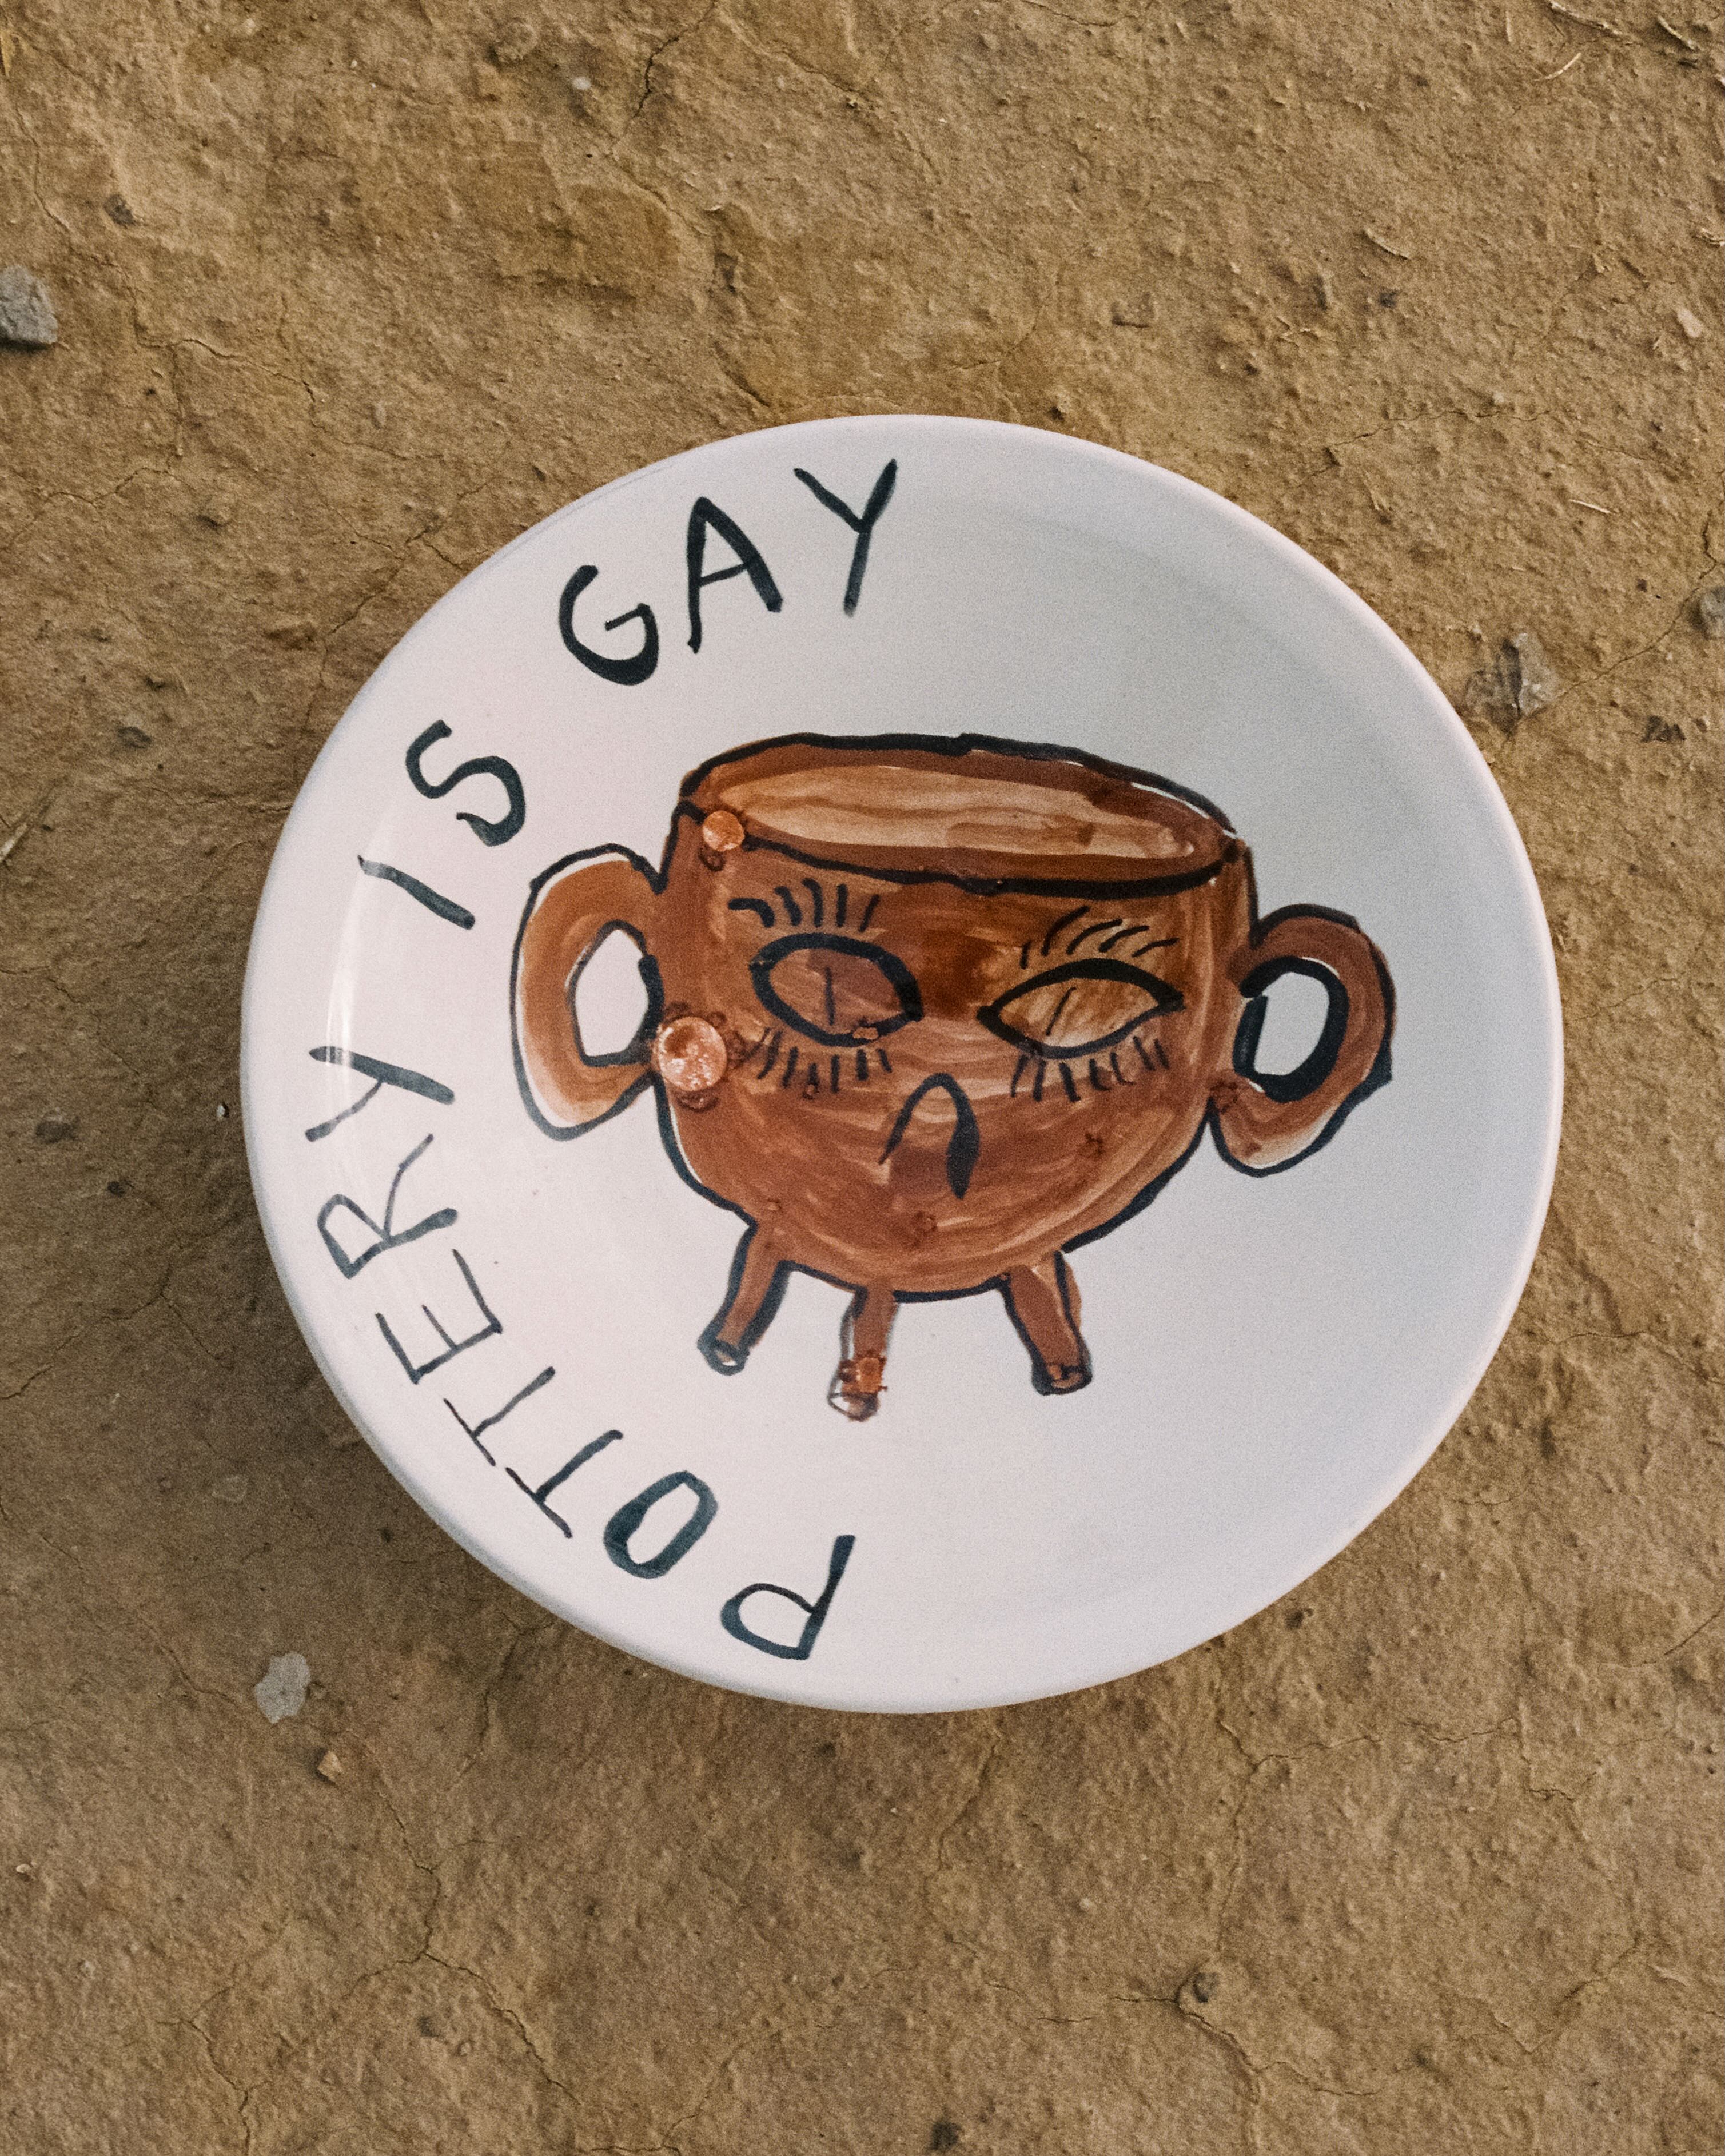 "Pottery is gay" big platter